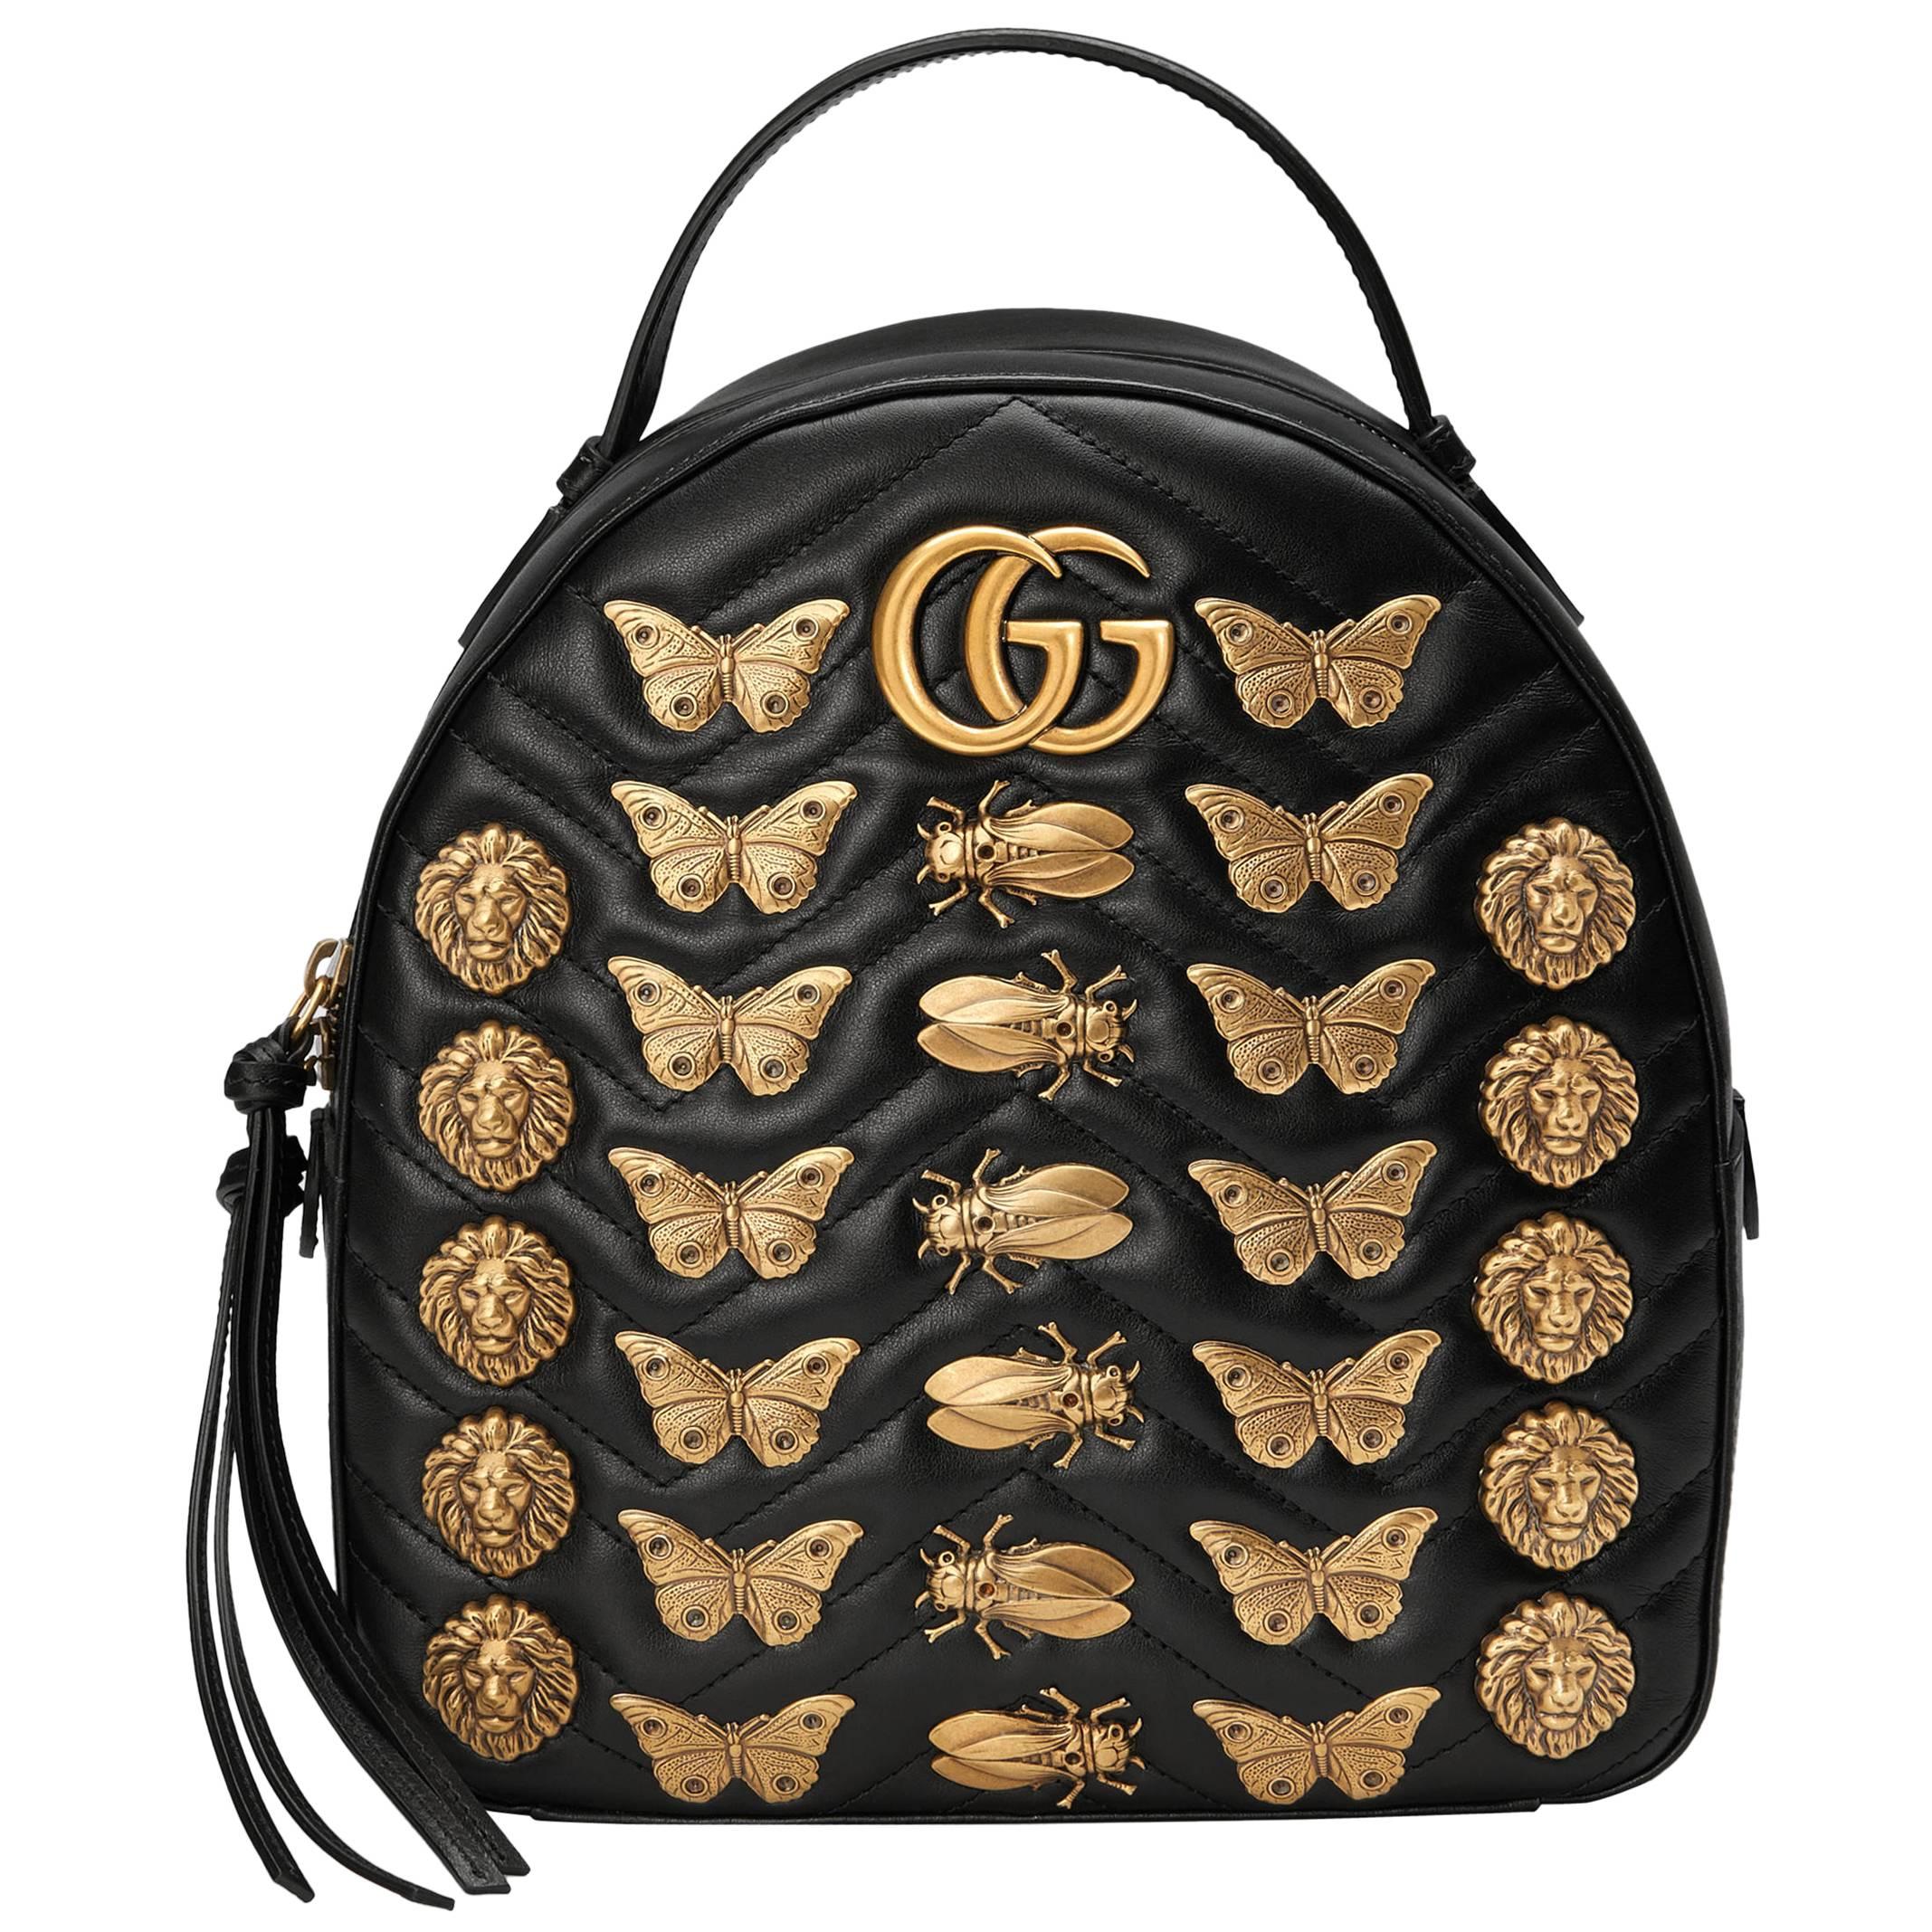 Sold at Auction: Gucci Patent Leather Backpack